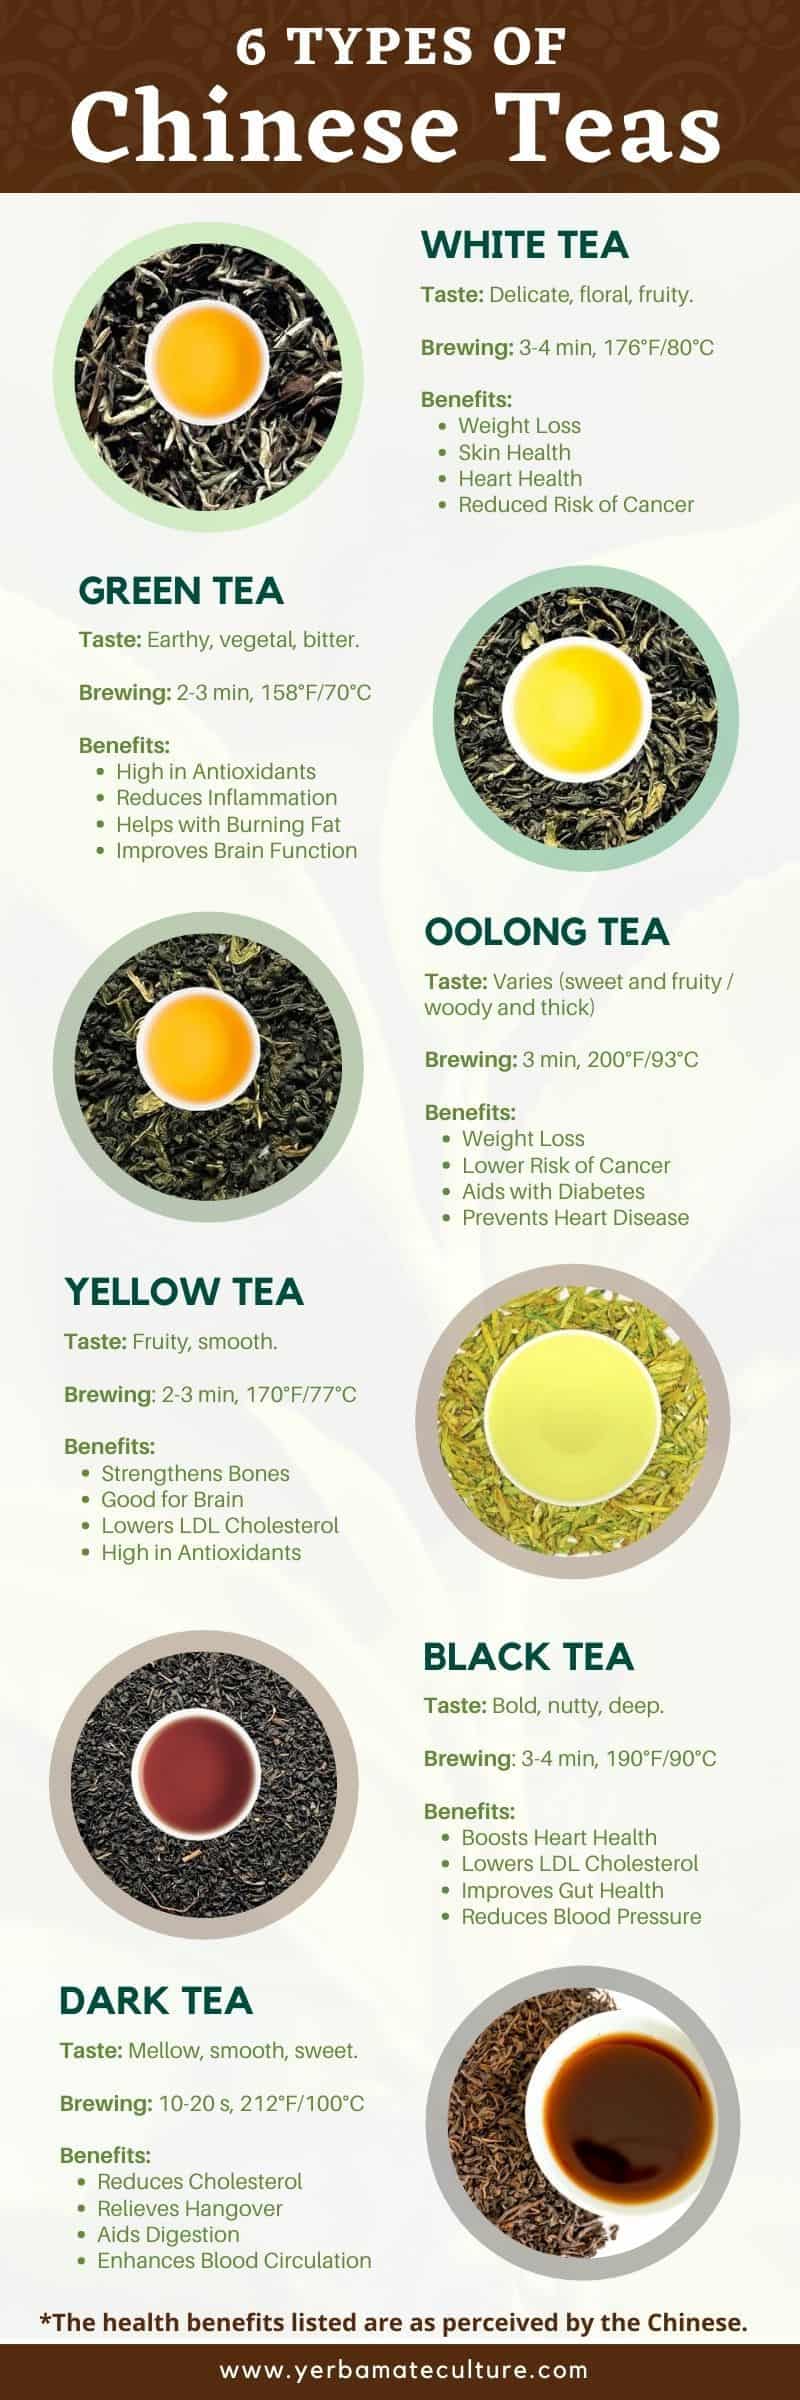 6 types of Chinese teas